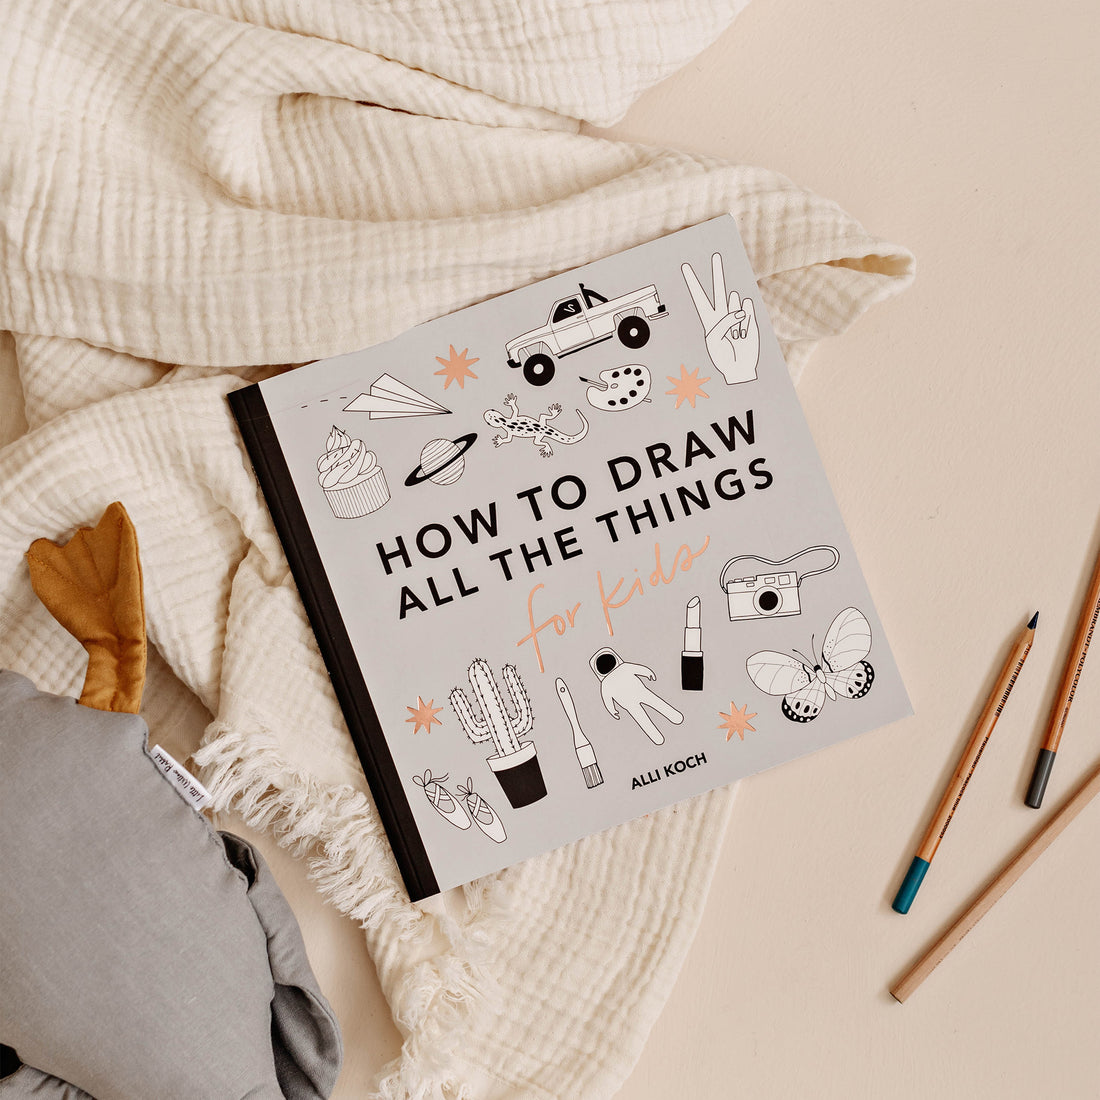 How to draw a Book | Learn to draw Books | Drawing Books for beginners |  Learn to draw books, Book drawing, Learn to draw